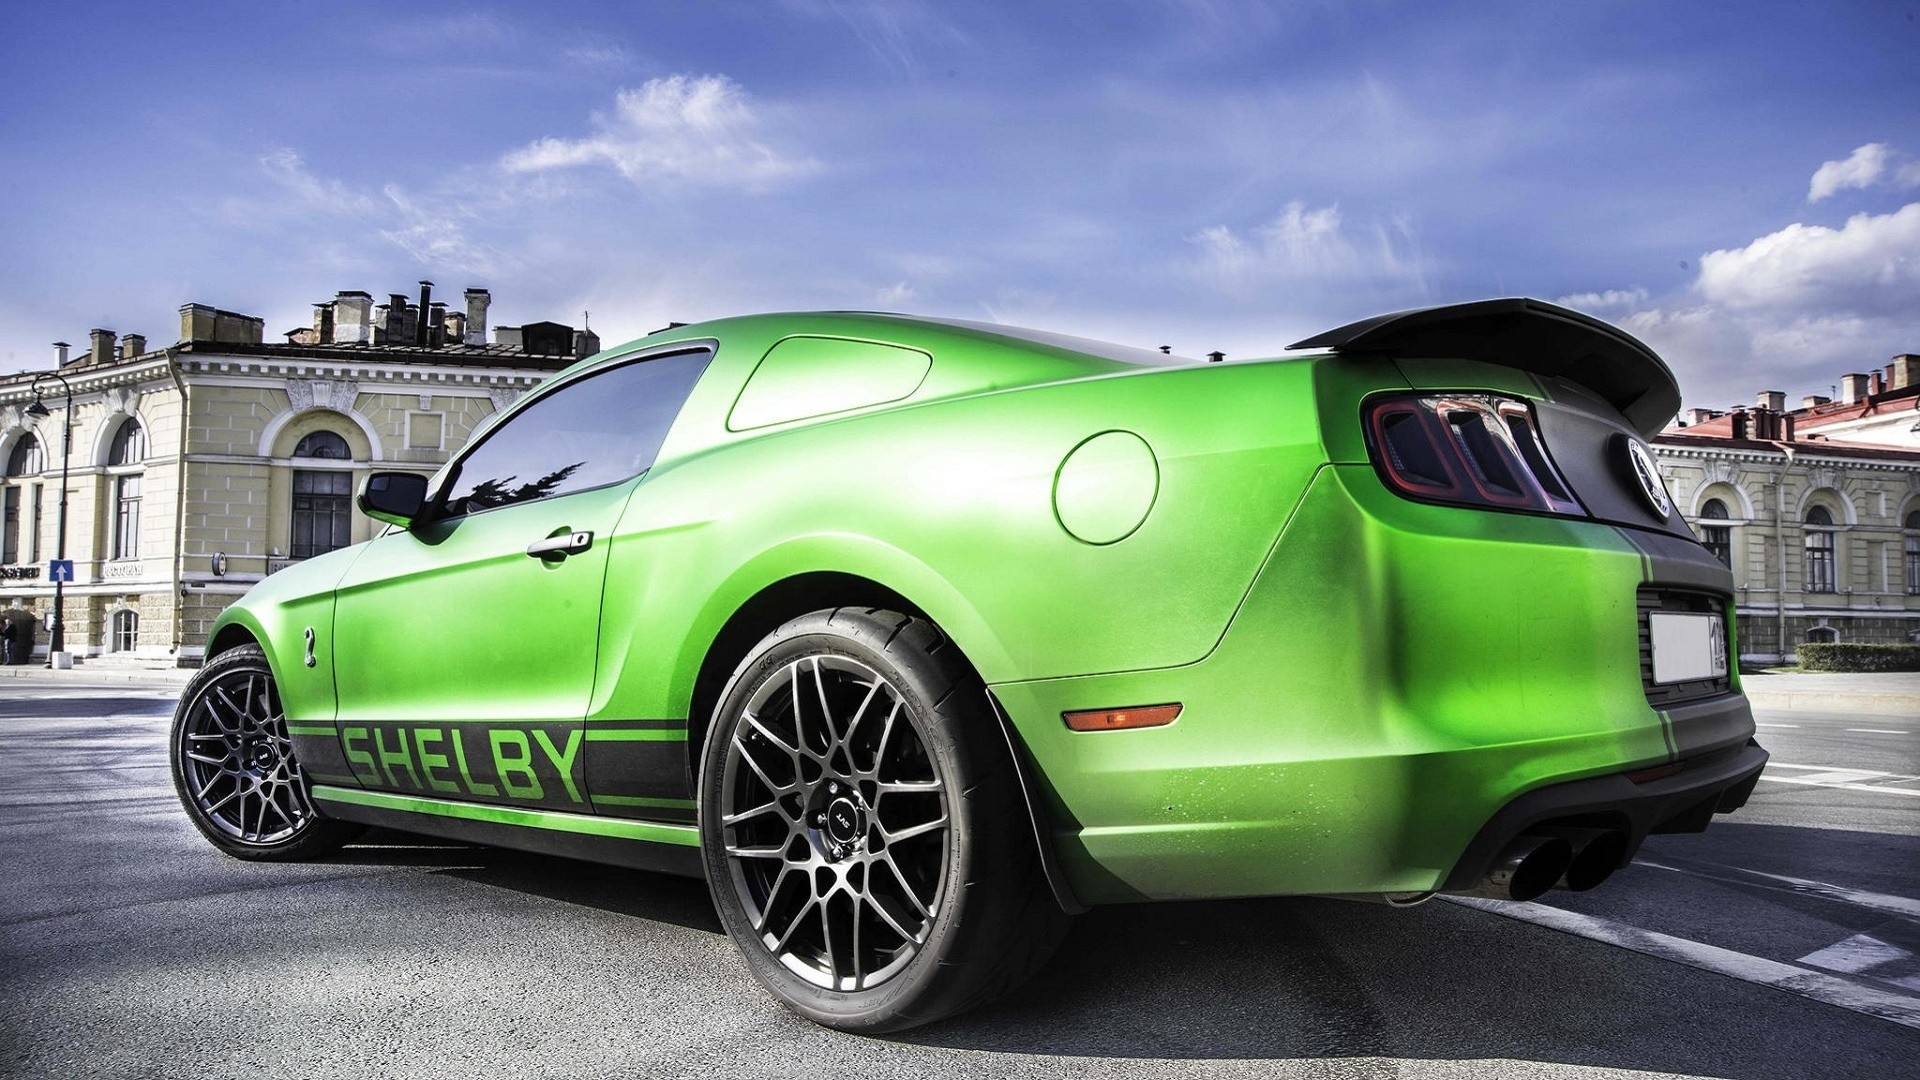 General 1920x1080 Shelby car green cars vehicle Ford Ford Mustang muscle cars American cars